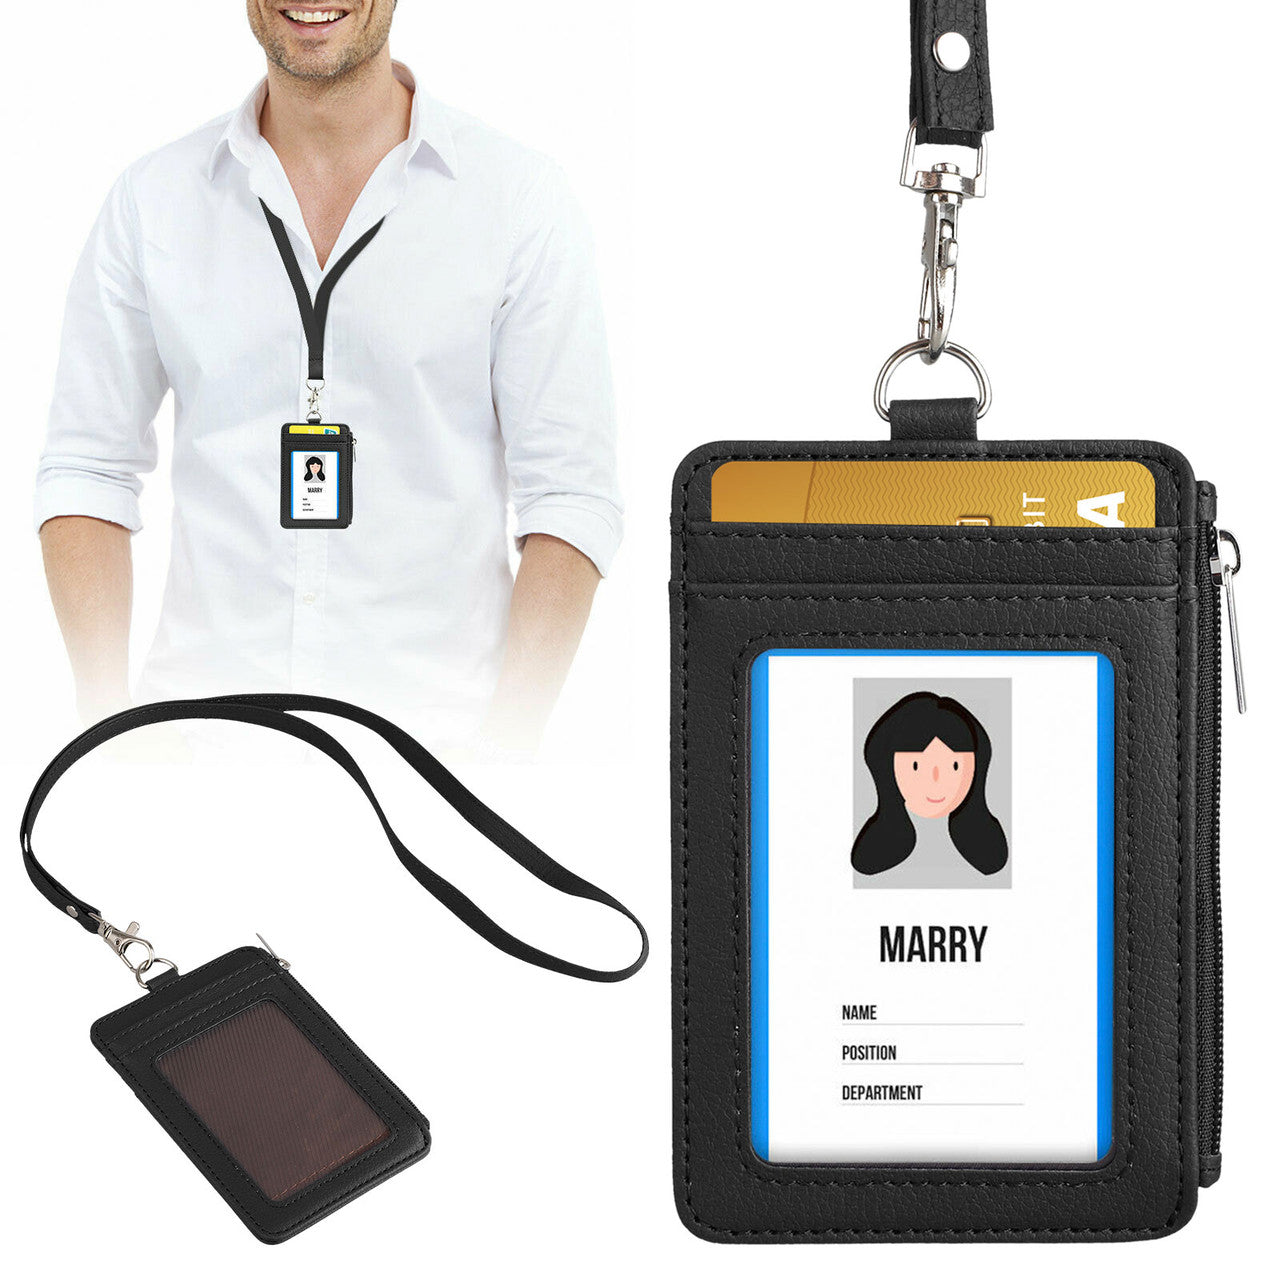 2-Sided Vertical Style PU Leather ID Badge Holder with 1 ID Window, 4 Card Slots, 1 Side Zipper Pocket and 1 Piece 20 Inch PU Neck Lanyard/Strap, Black